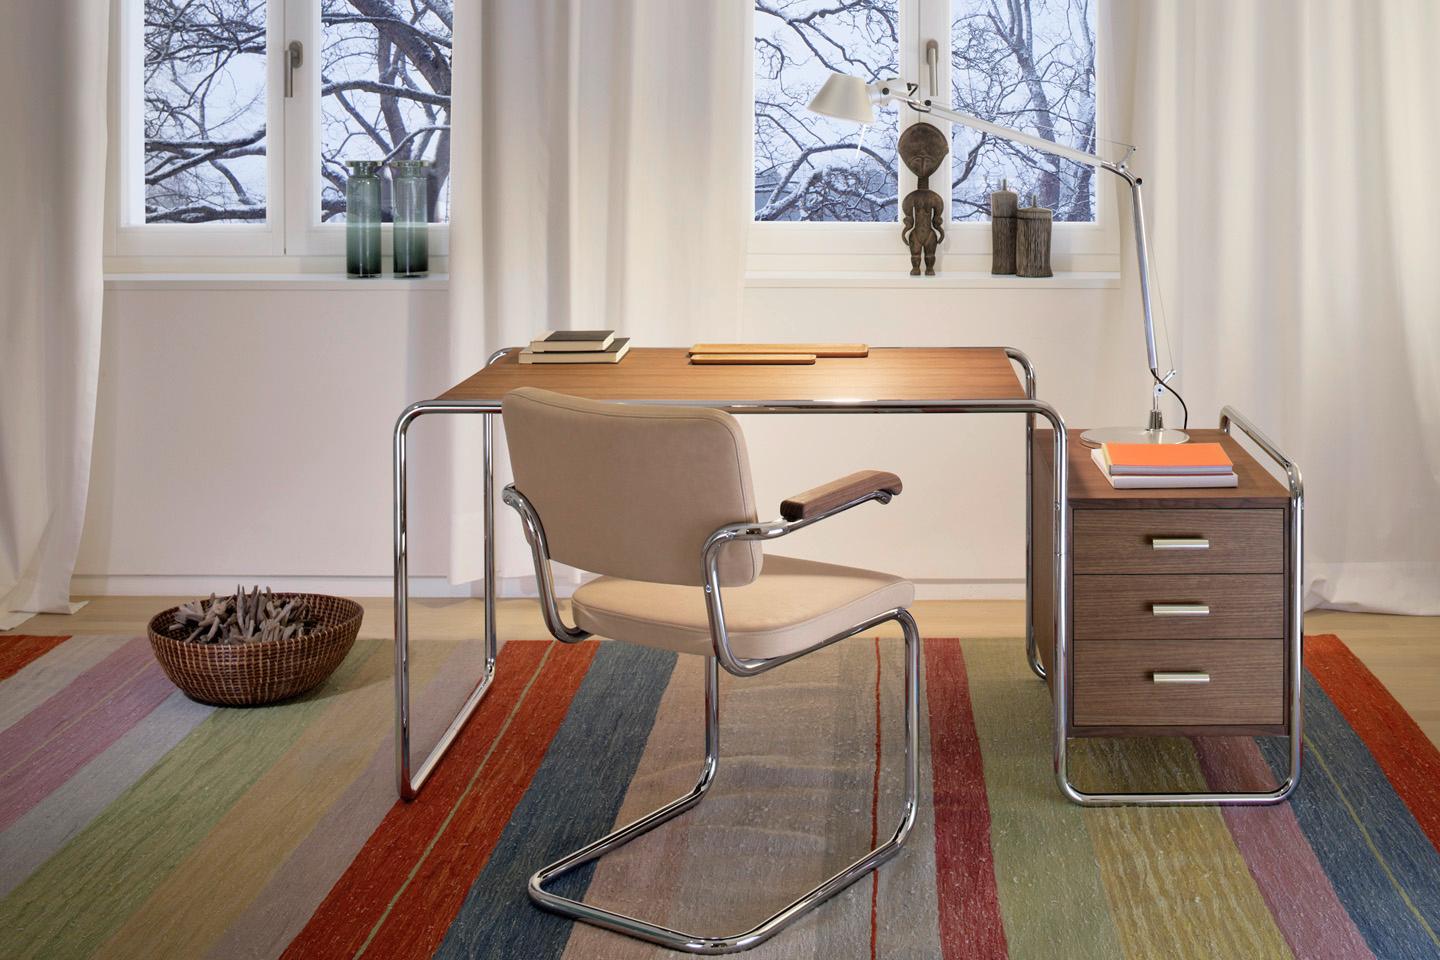 RANGE S 285

It is as though Marcel Breuer had anticipated today’s home offices and mobile computers: The compact tubular steel desk S 285 that he designed is an elegant companion for modern lifestyle and work.
Marcel Breuer’s tubular steel desk